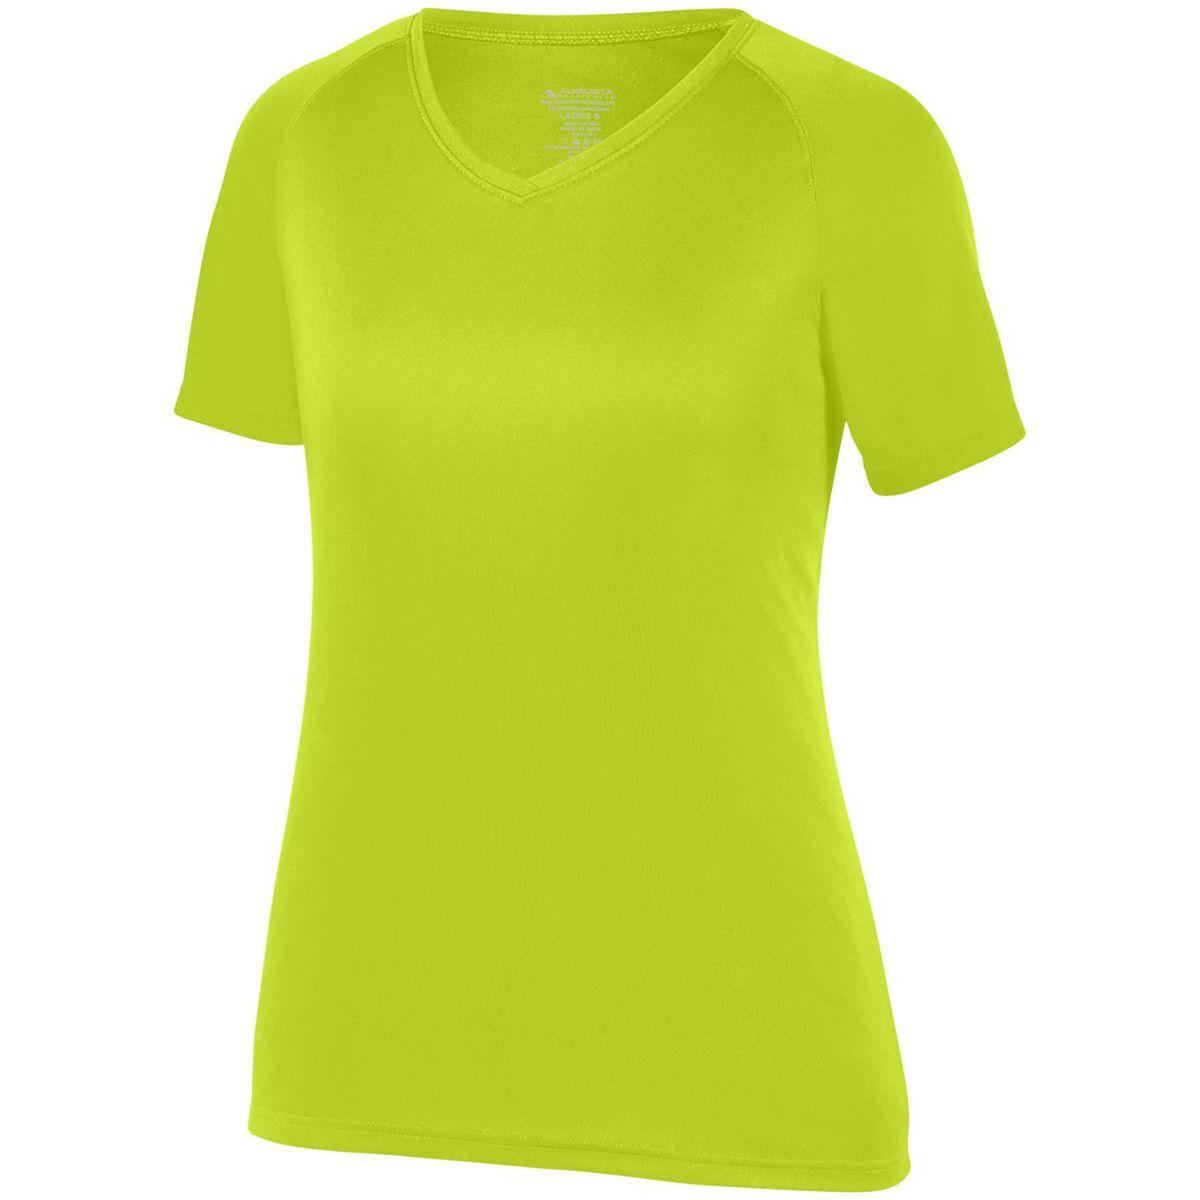 Augusta Sportswear Girls Attain Wicking Raglan Sleeve Tee in Lime  -Part of the Girls, T-Shirts, Augusta-Products, Girls-Tee-Shirt, Shirts product lines at KanaleyCreations.com